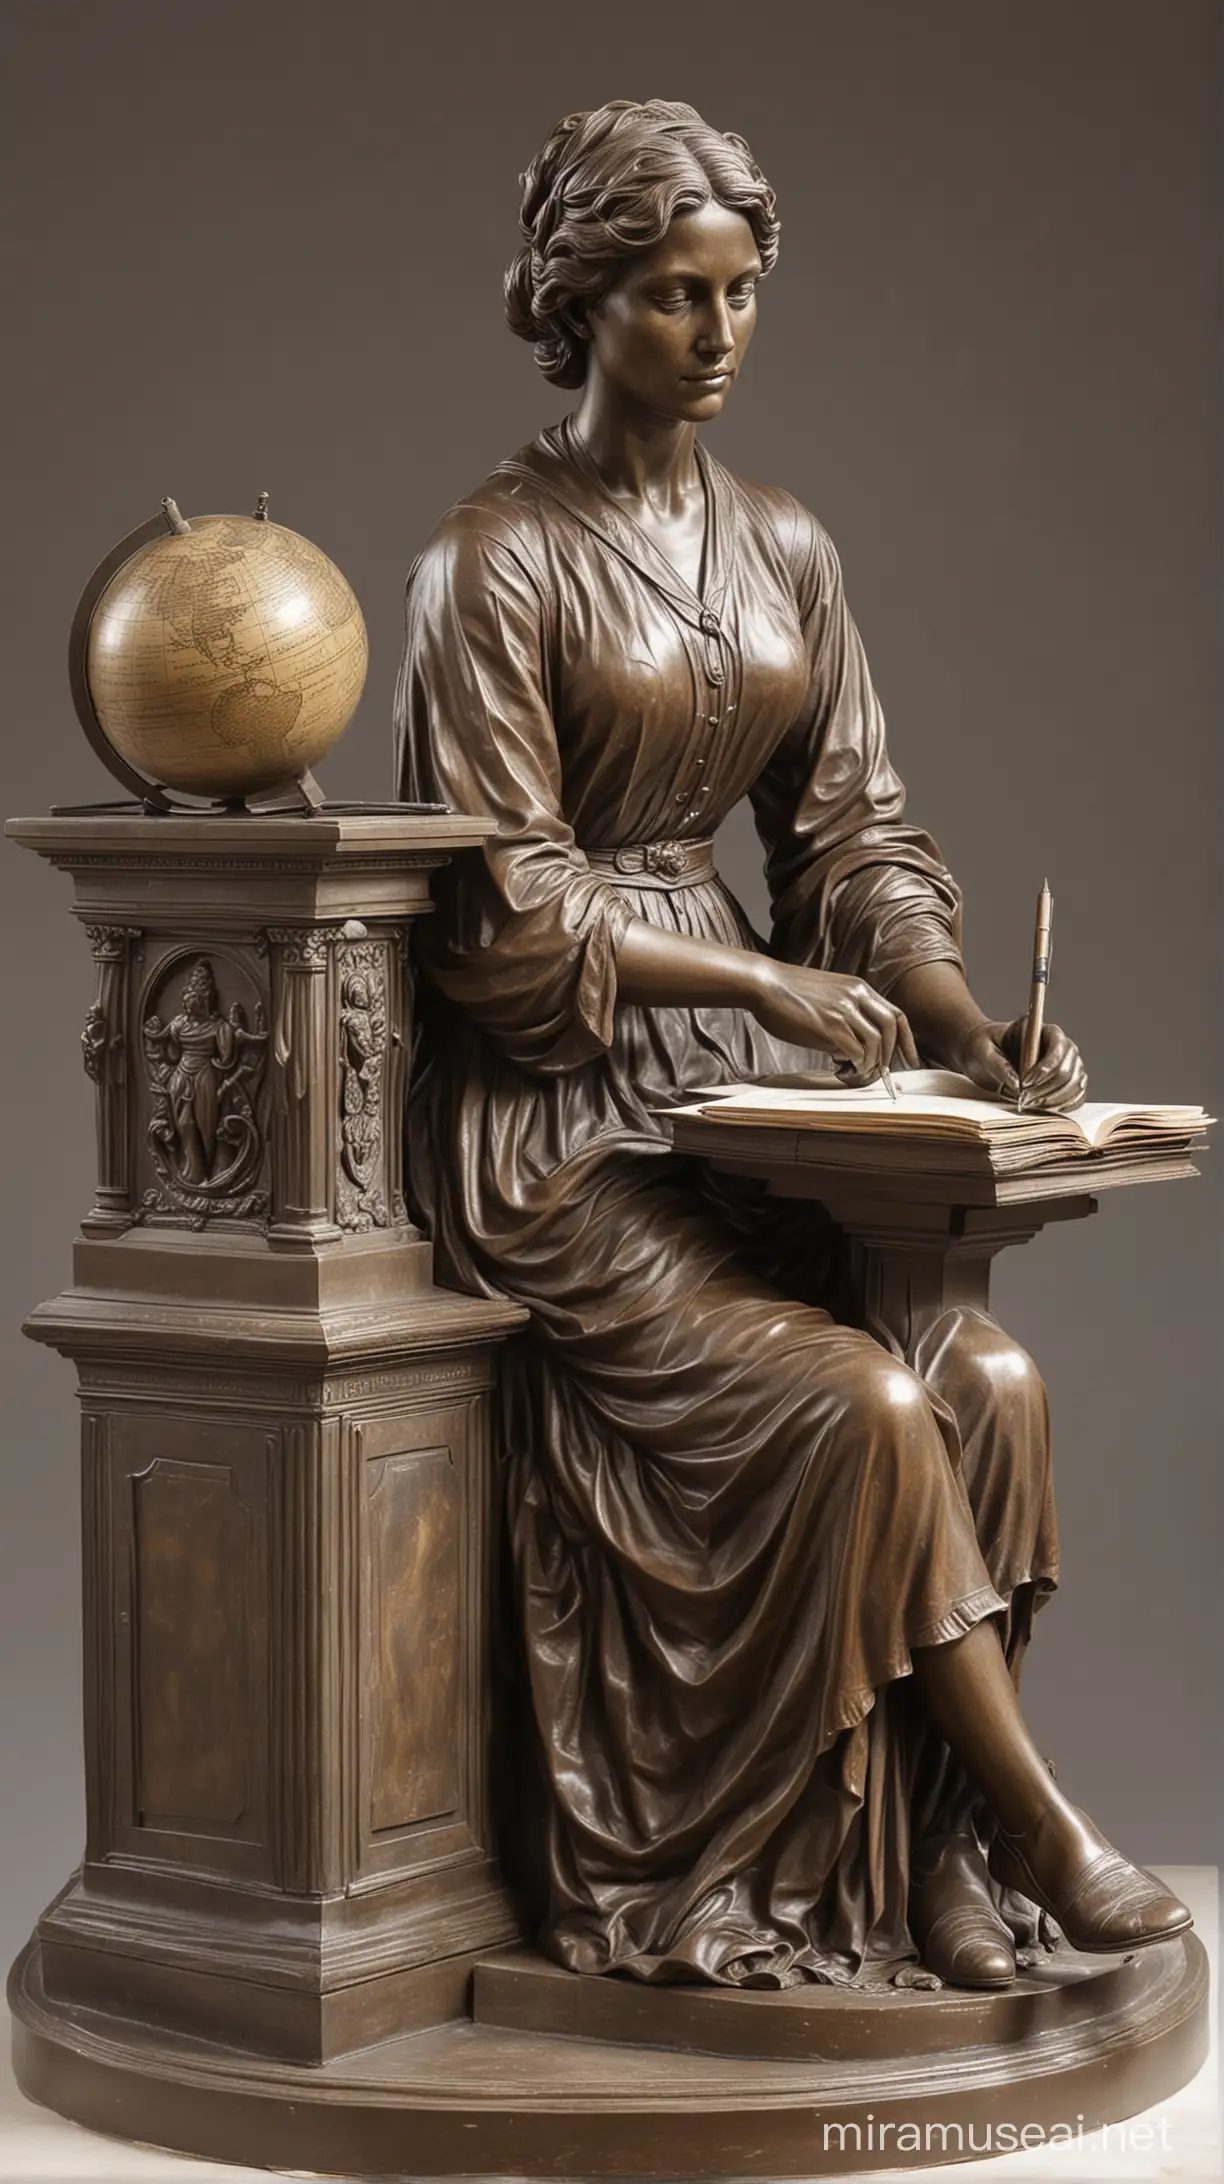 Bronze Monument of Pioneering Female Teacher with Globe and Books